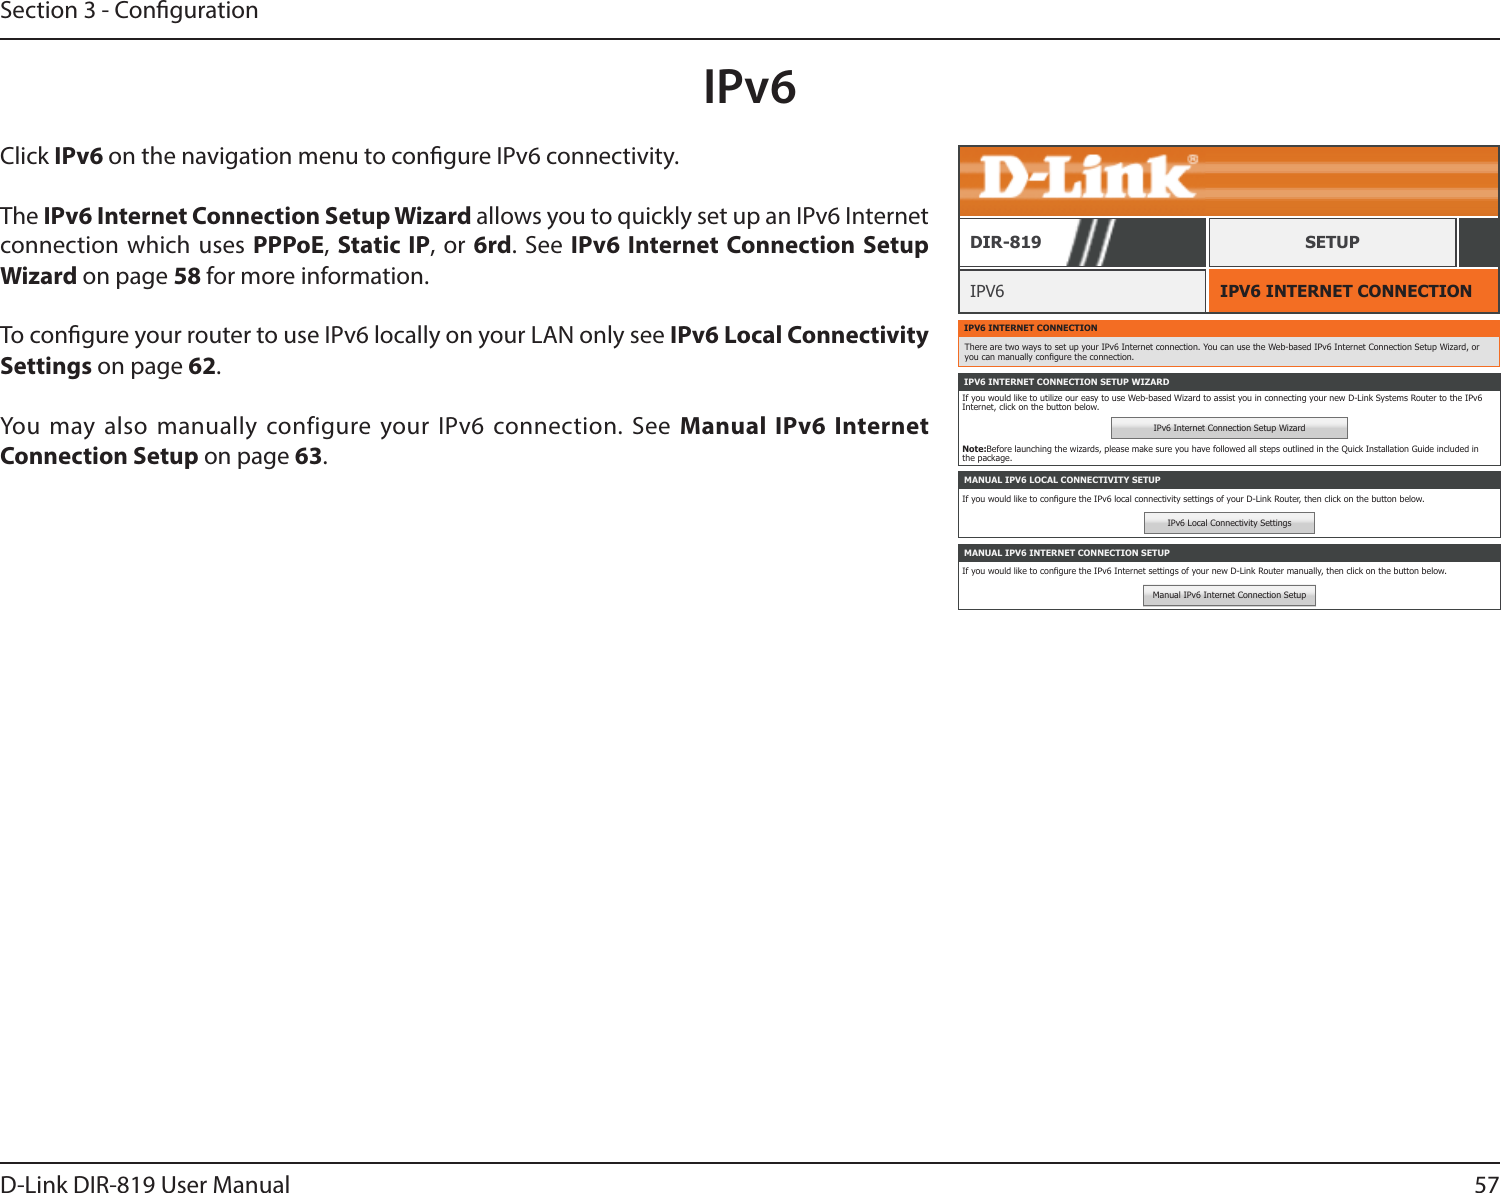 57D-Link DIR-819 User ManualSection 3 - CongurationIPv6IPV6 INTERNET CONNECTIONIPV6DIR-819 SETUPClick IPv6 on the navigation menu to congure IPv6 connectivity.The IPv6 Internet Connection Setup Wizard allows you to quickly set up an IPv6 Internet connection which uses PPPoE, Static IP, or 6rd. See IPv6 Internet Connection Setup Wizard on page 58 for more information.To congure your router to use IPv6 locally on your LAN only see IPv6 Local Connectivity Settings on page 62.You may also manually configure your IPv6 connection. See Manual IPv6 Internet Connection Setup on page 63.IPV6 INTERNET CONNECTIONThere are two ways to set up your IPv6 Internet connection. You can use the Web-based IPv6 Internet Connection Setup Wizard, or you can manually congure the connection.IPV6 INTERNET CONNECTION SETUP WIZARDIf you would like to utilize our easy to use Web-based Wizard to assist you in connecting your new D-Link Systems Router to the IPv6 Internet, click on the button below.IPv6 Internet Connection Setup WizardNote:Before launching the wizards, please make sure you have followed all steps outlined in the Quick Installation Guide included in the package.MANUAL IPV6 LOCAL CONNECTIVITY SETUPIf you would like to congure the IPv6 local connectivity settings of your D-Link Router, then click on the button below.IPv6 Local Connectivity SettingsMANUAL IPV6 INTERNET CONNECTION SETUPIf you would like to congure the IPv6 Internet settings of your new D-Link Router manually, then click on the button below.Manual IPv6 Internet Connection Setup